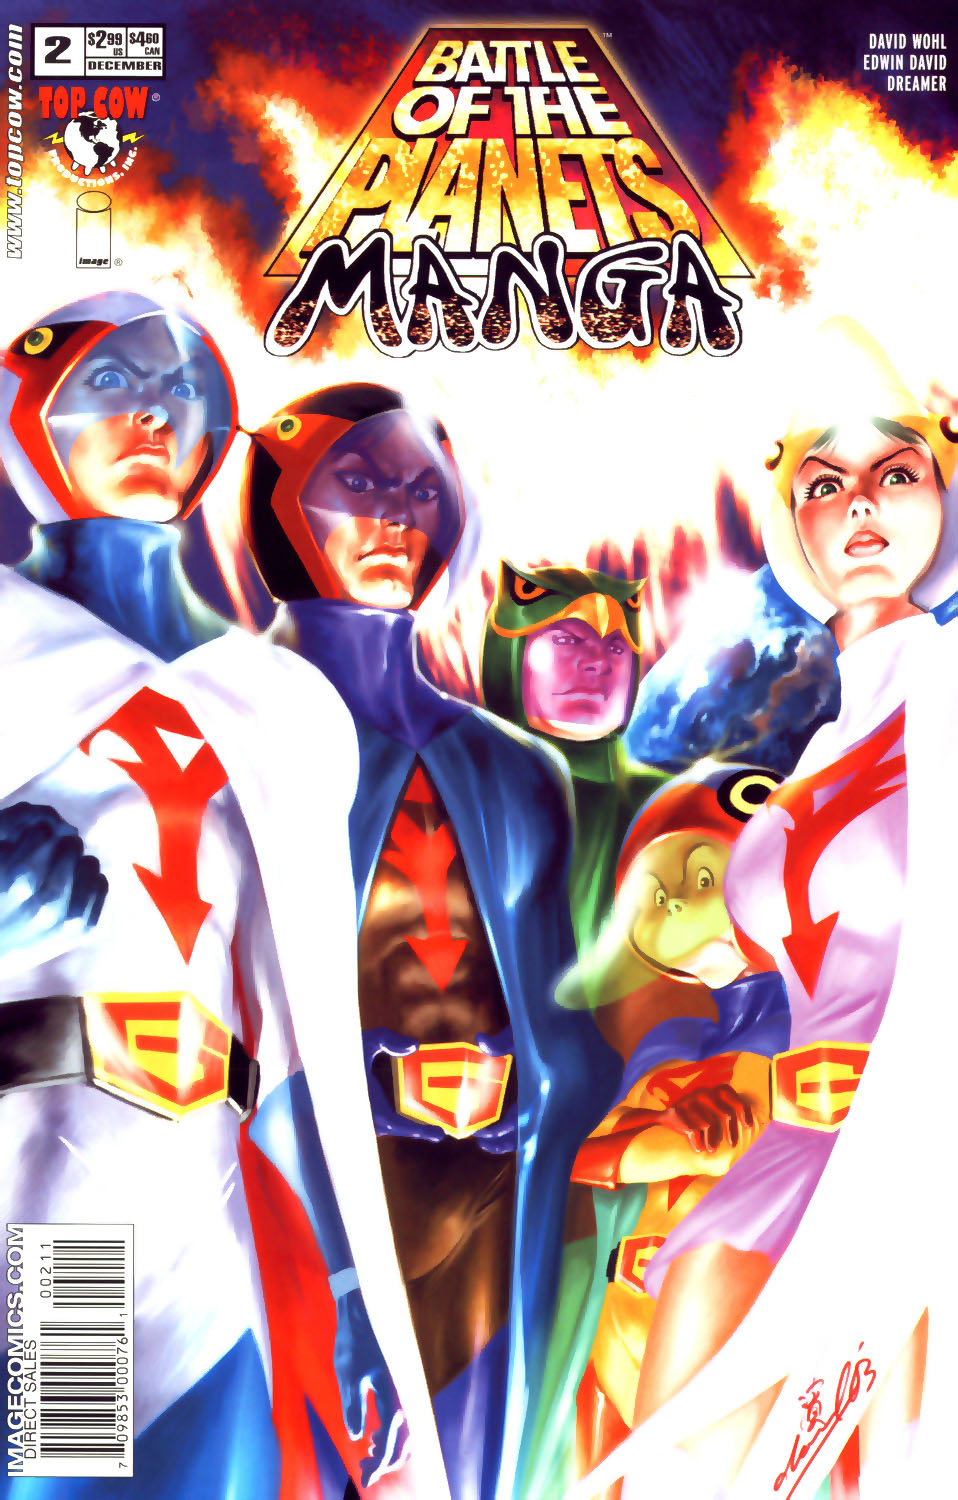 Read online Battle of the Planets: Manga comic -  Issue #2 - 1